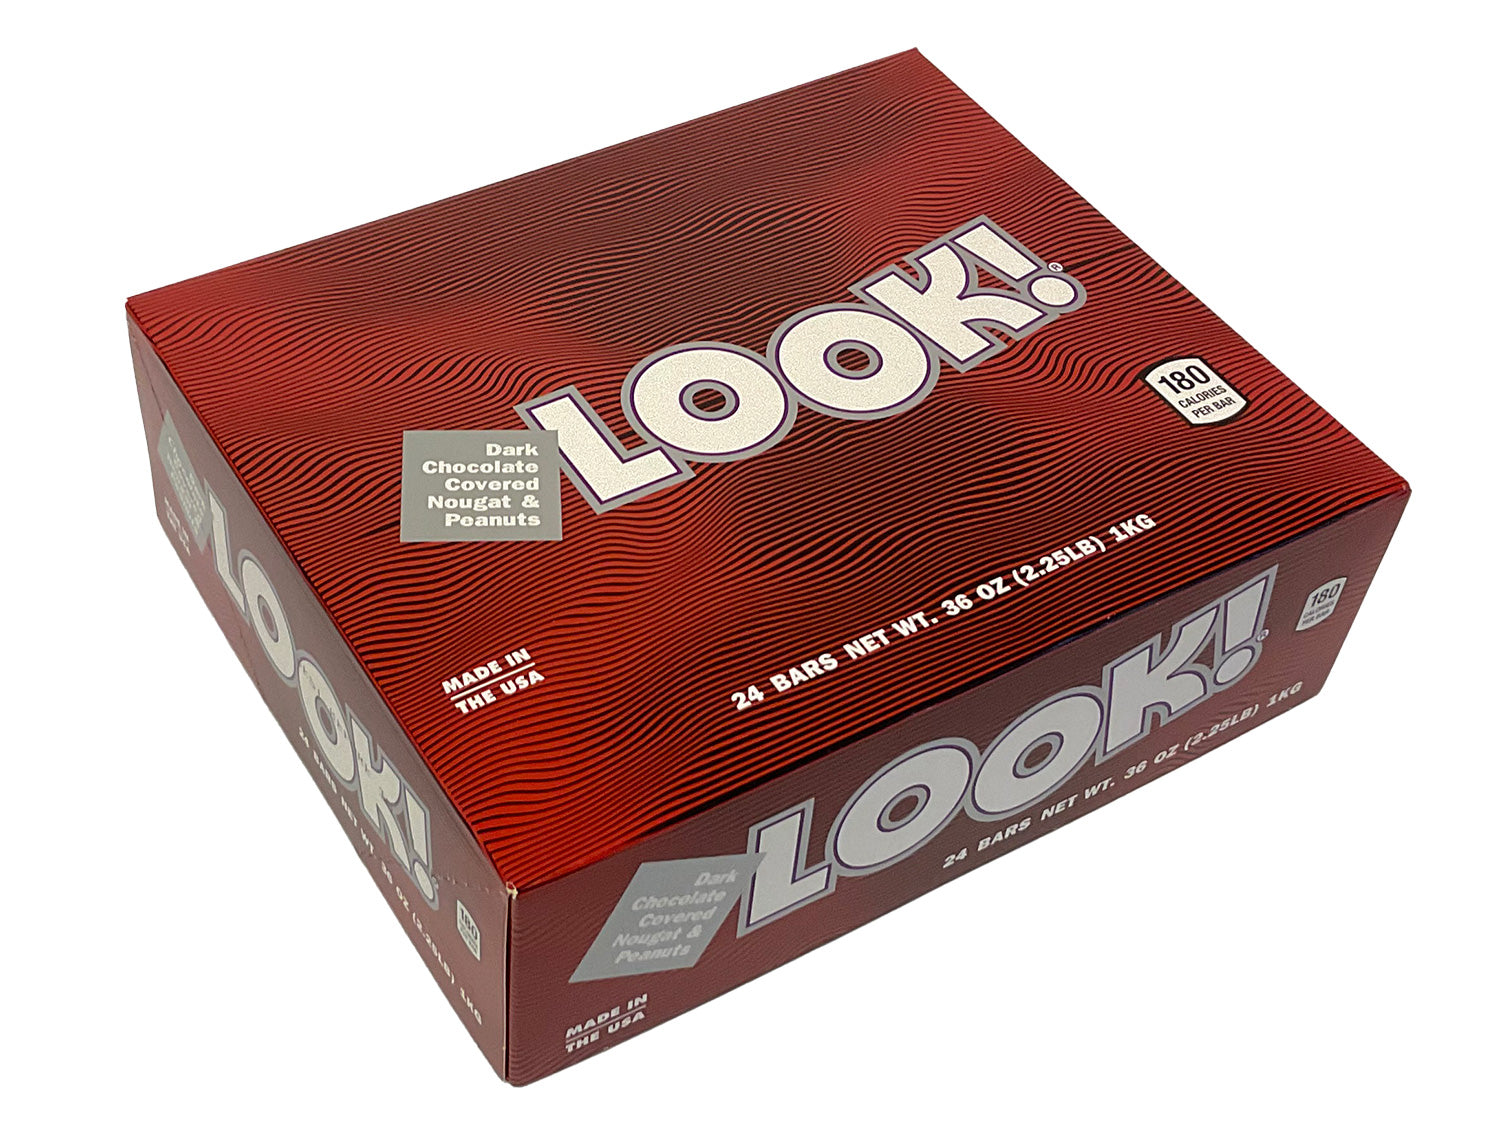 Look! - 1.375 oz candy bar - box of 24